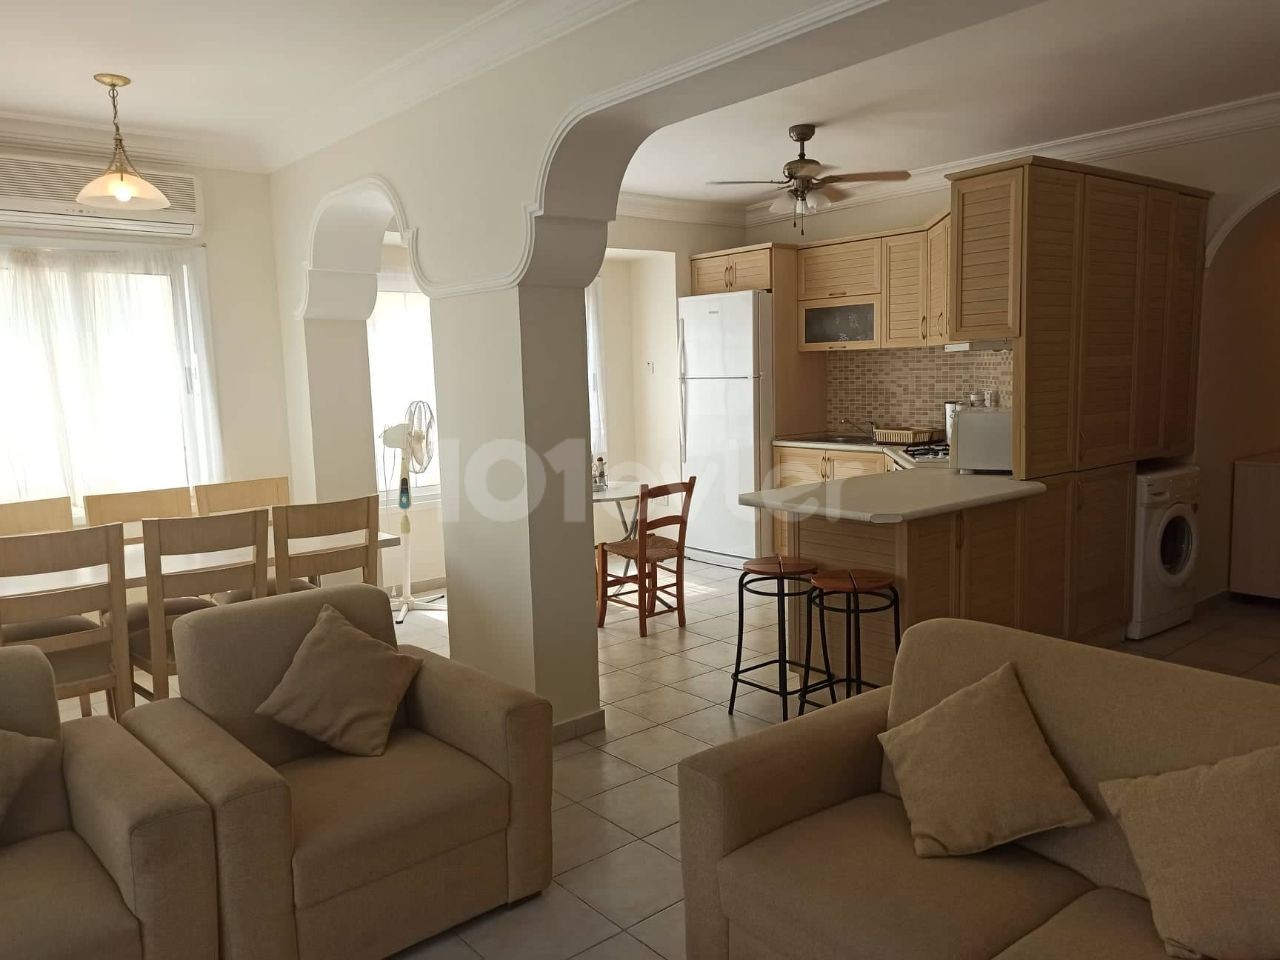 Llovell Presented 3 Bedroom Apartment In This Popular Area Of The City - Students Llovelcome ** 